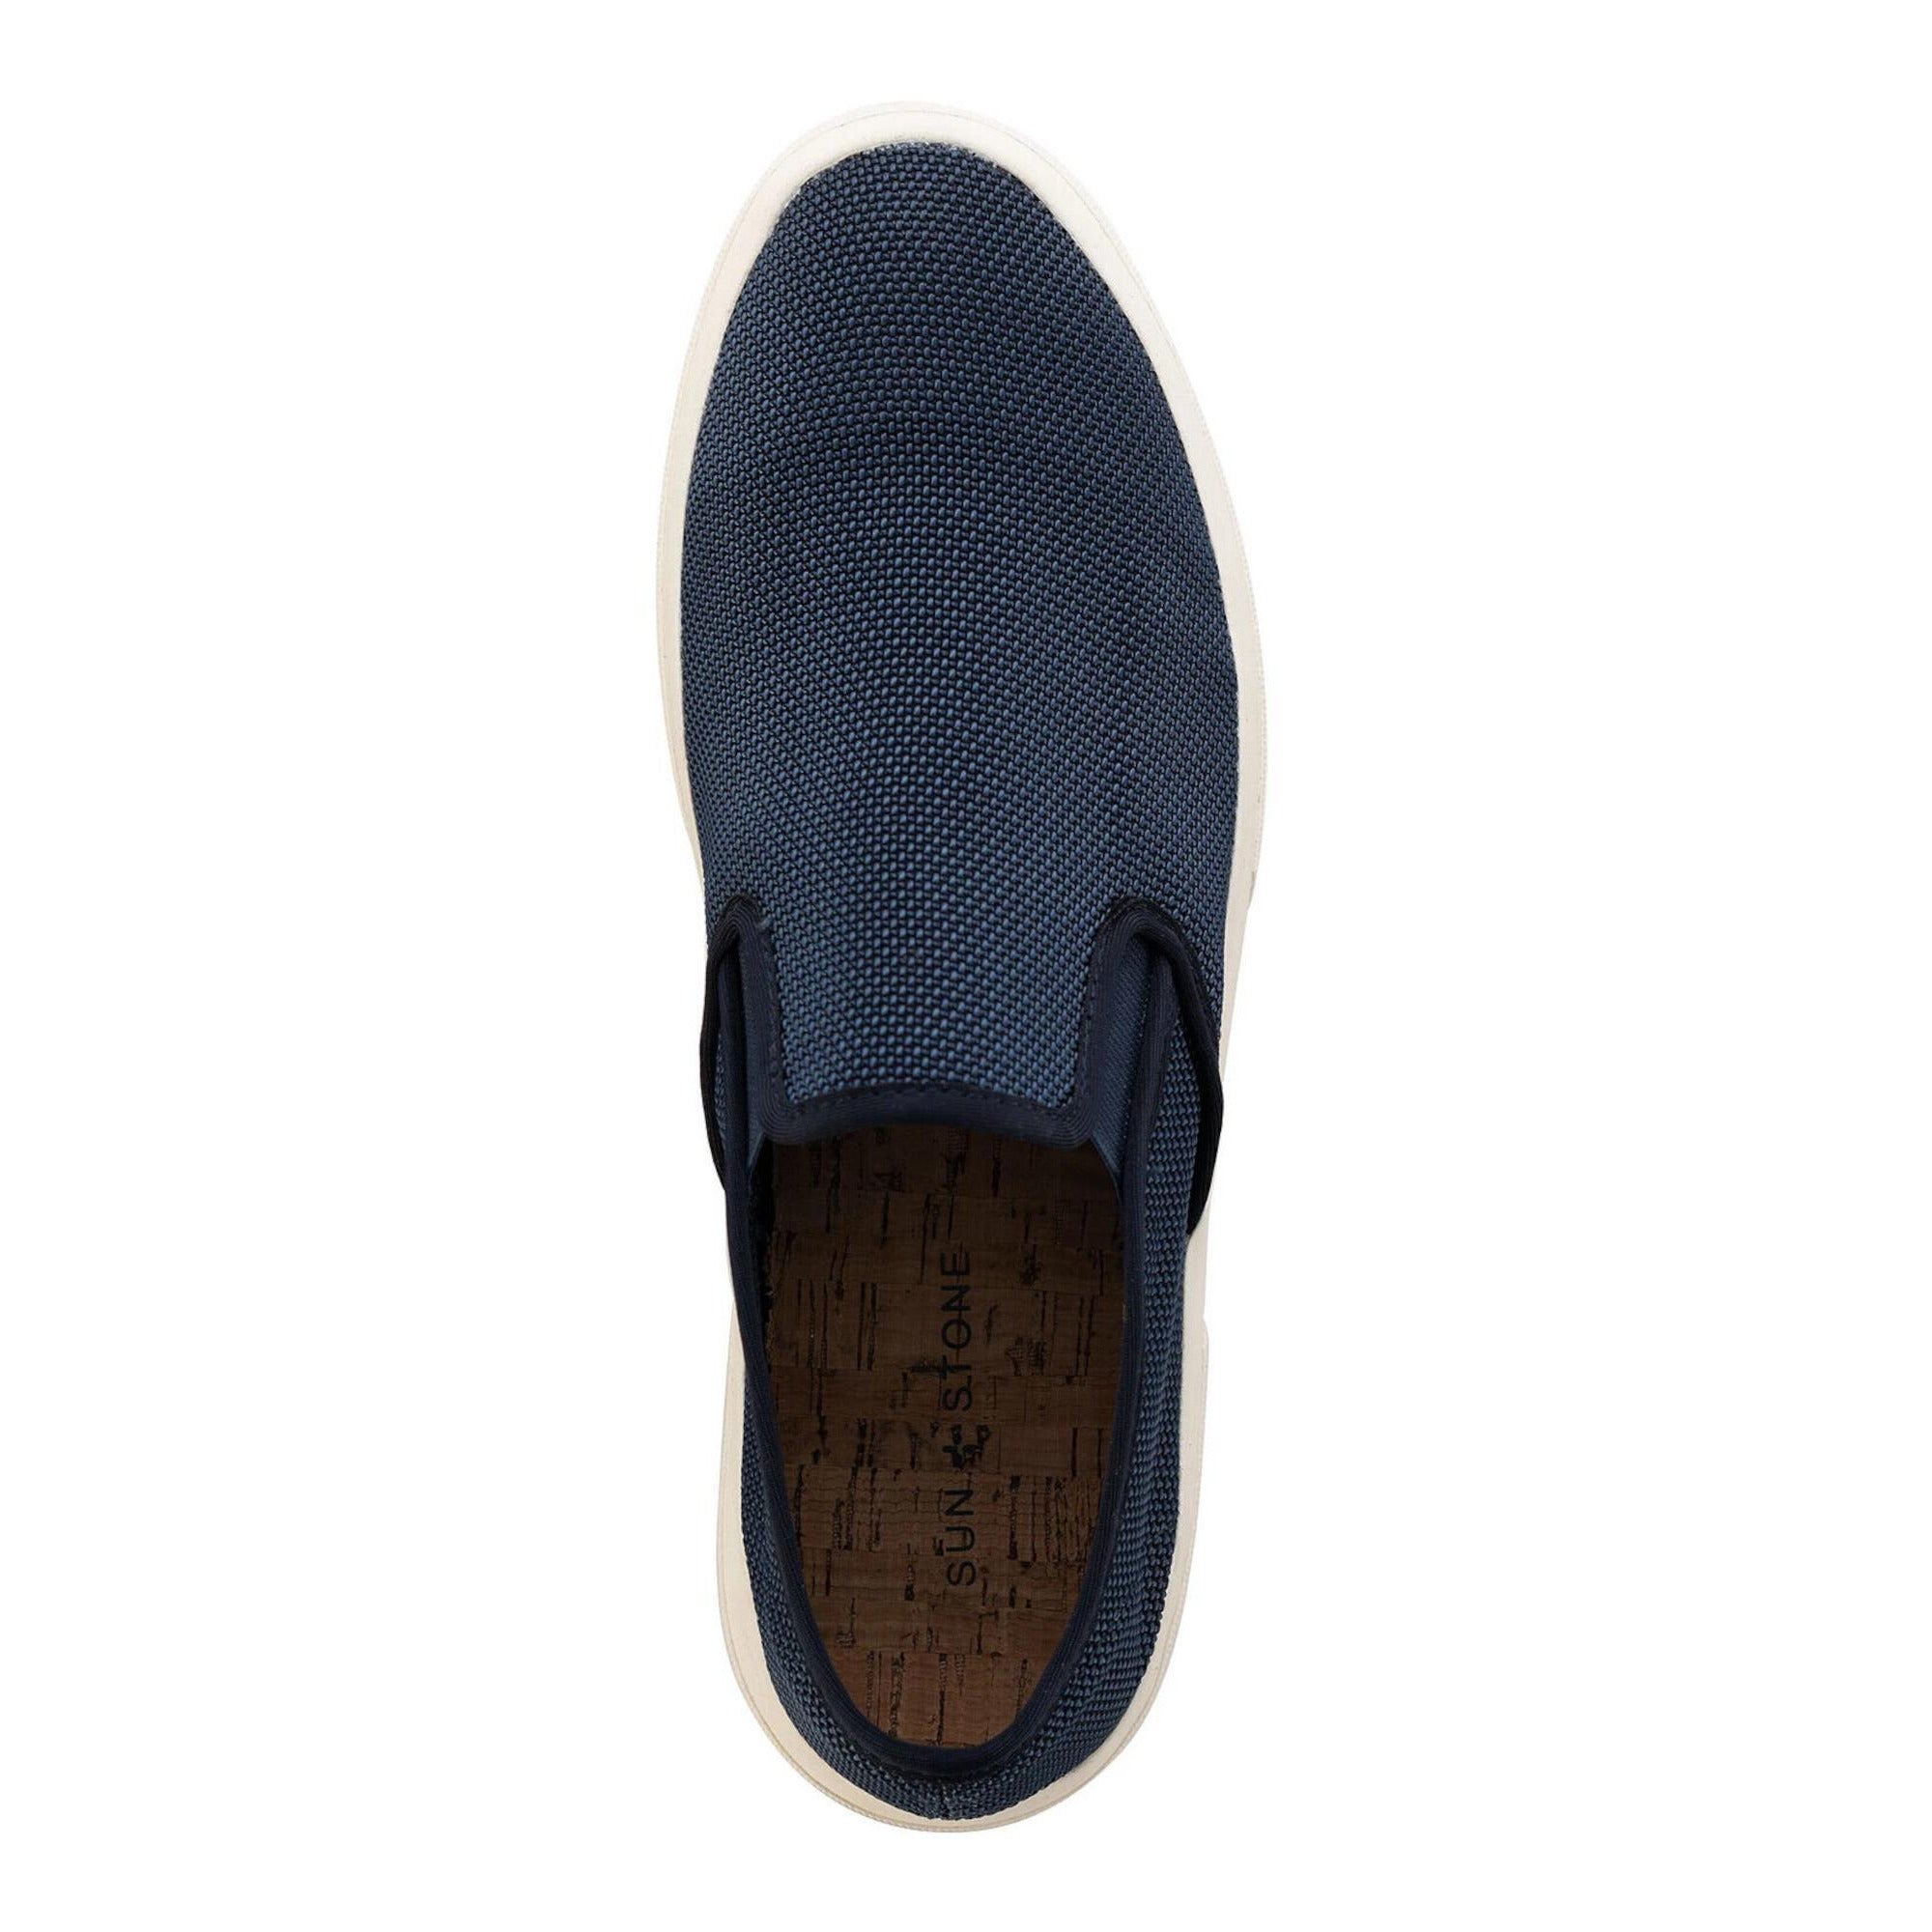 SUNSTONE Men Breathable Goring Round Toe Slip-On Sneakers Loafers LYLE Blue Navy